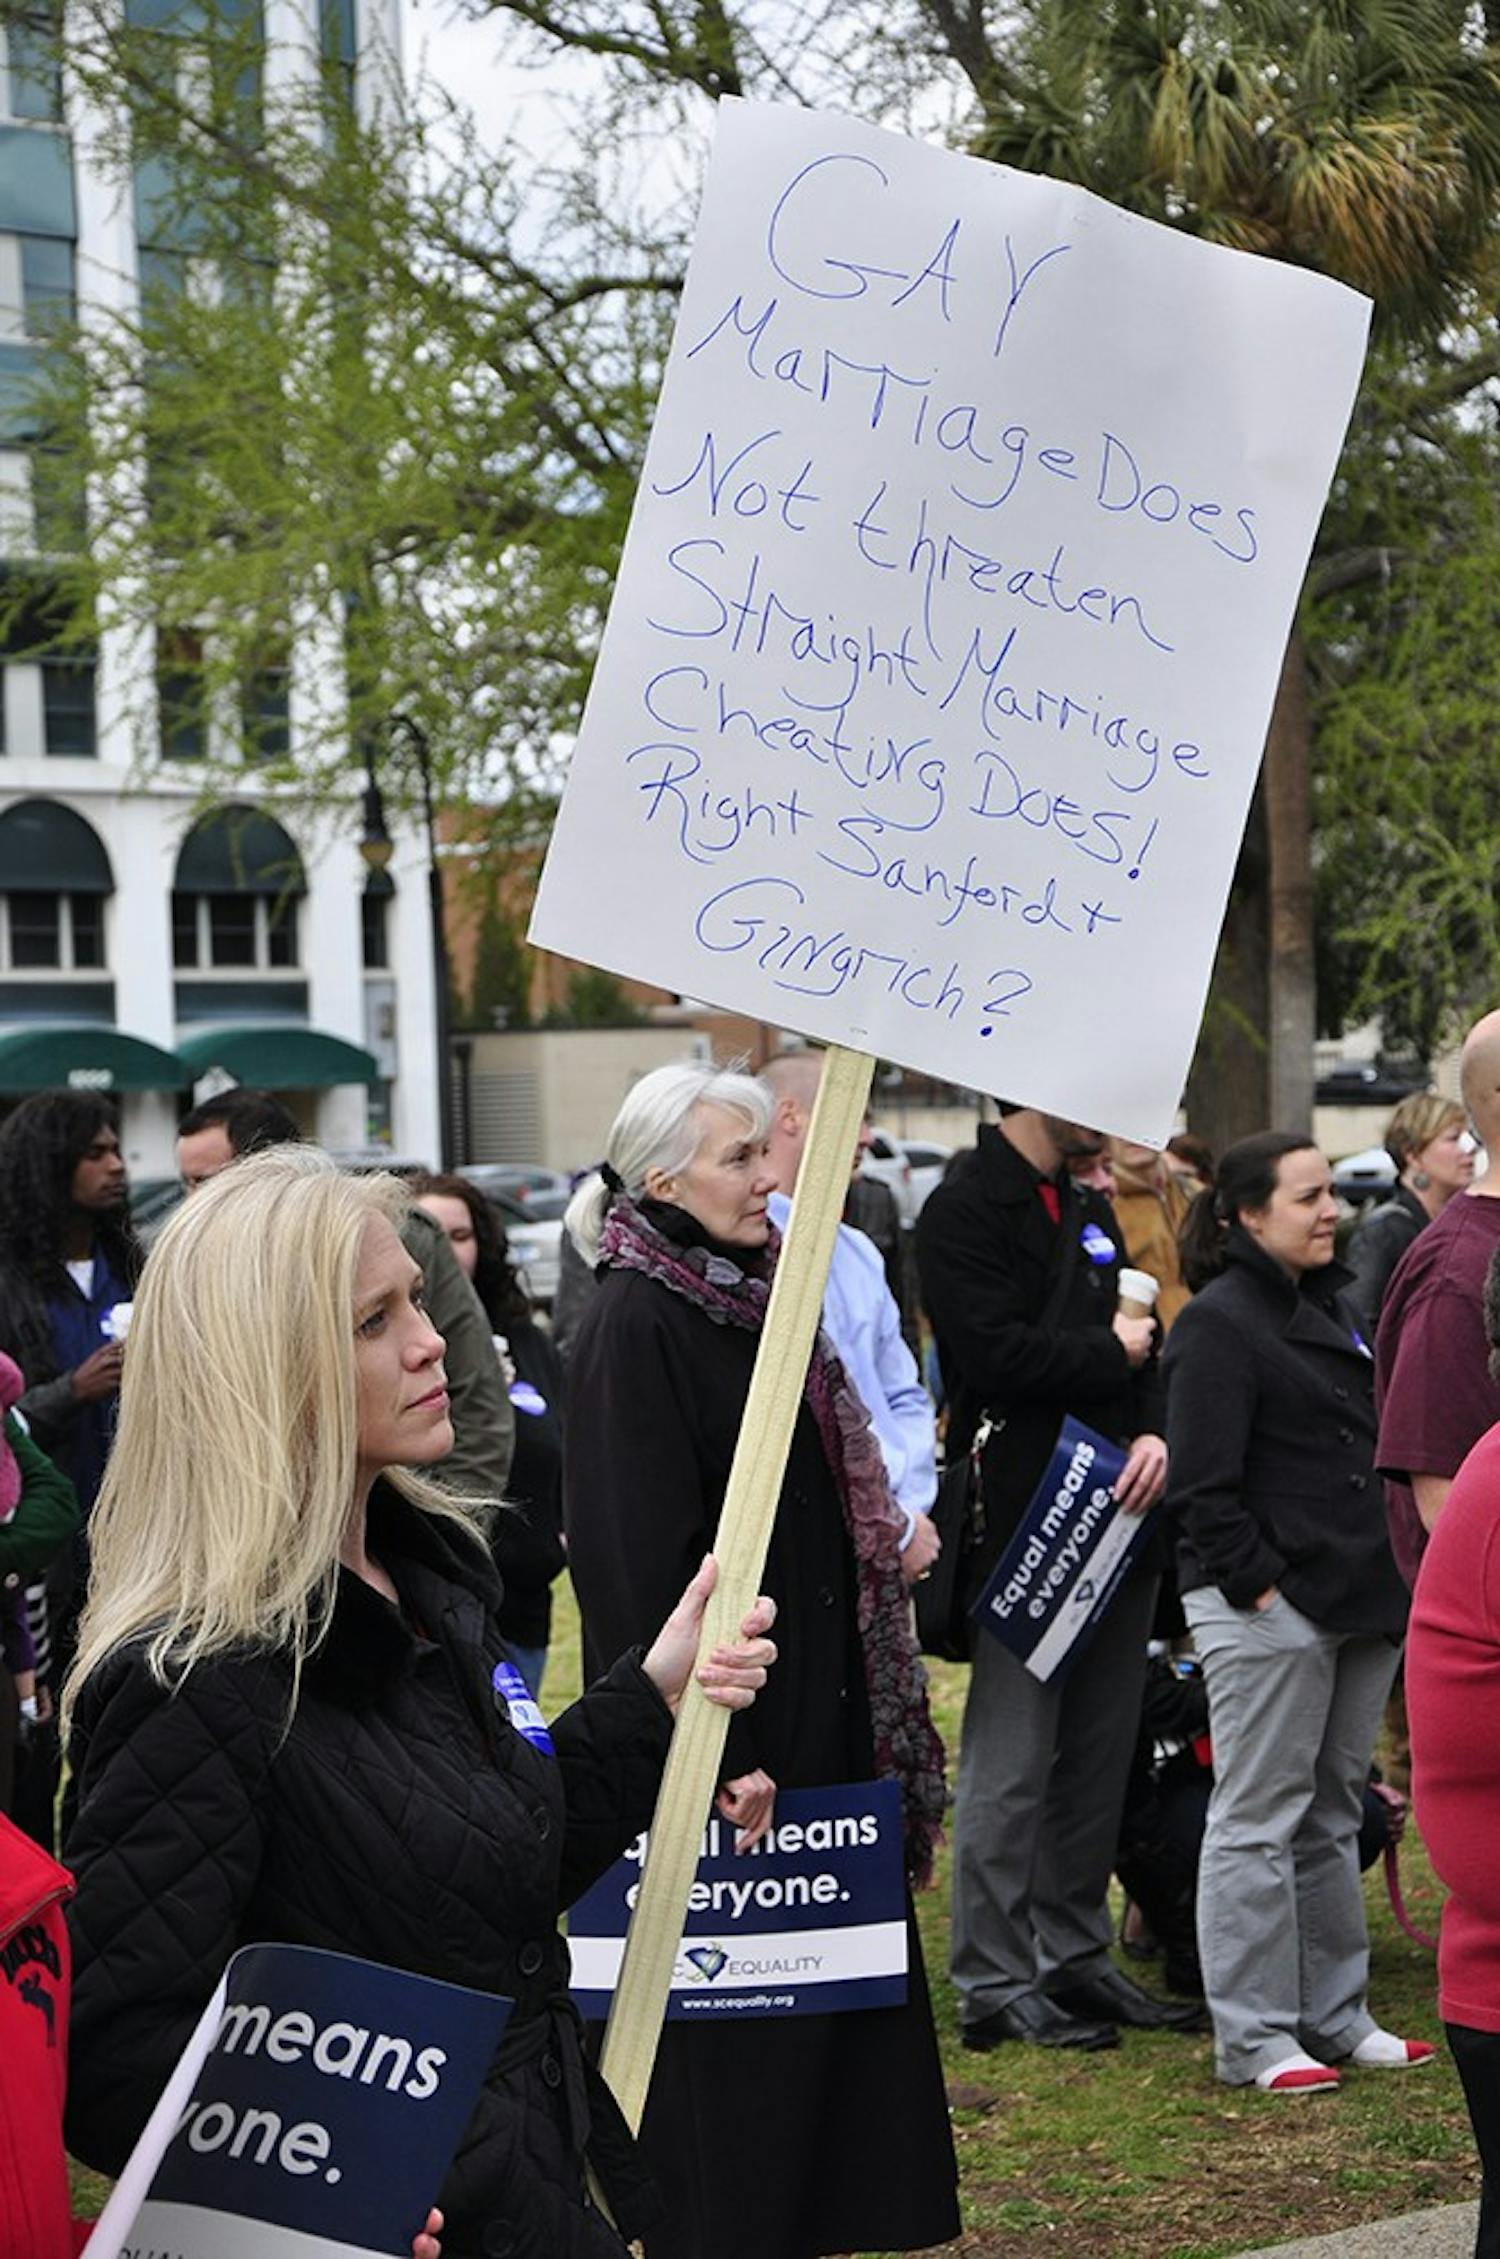 Many protesters at Tuesday's rally for same-sex marriage brought signs that expressed their opposition to Proposition 8 and the Defense of Marriage Act.